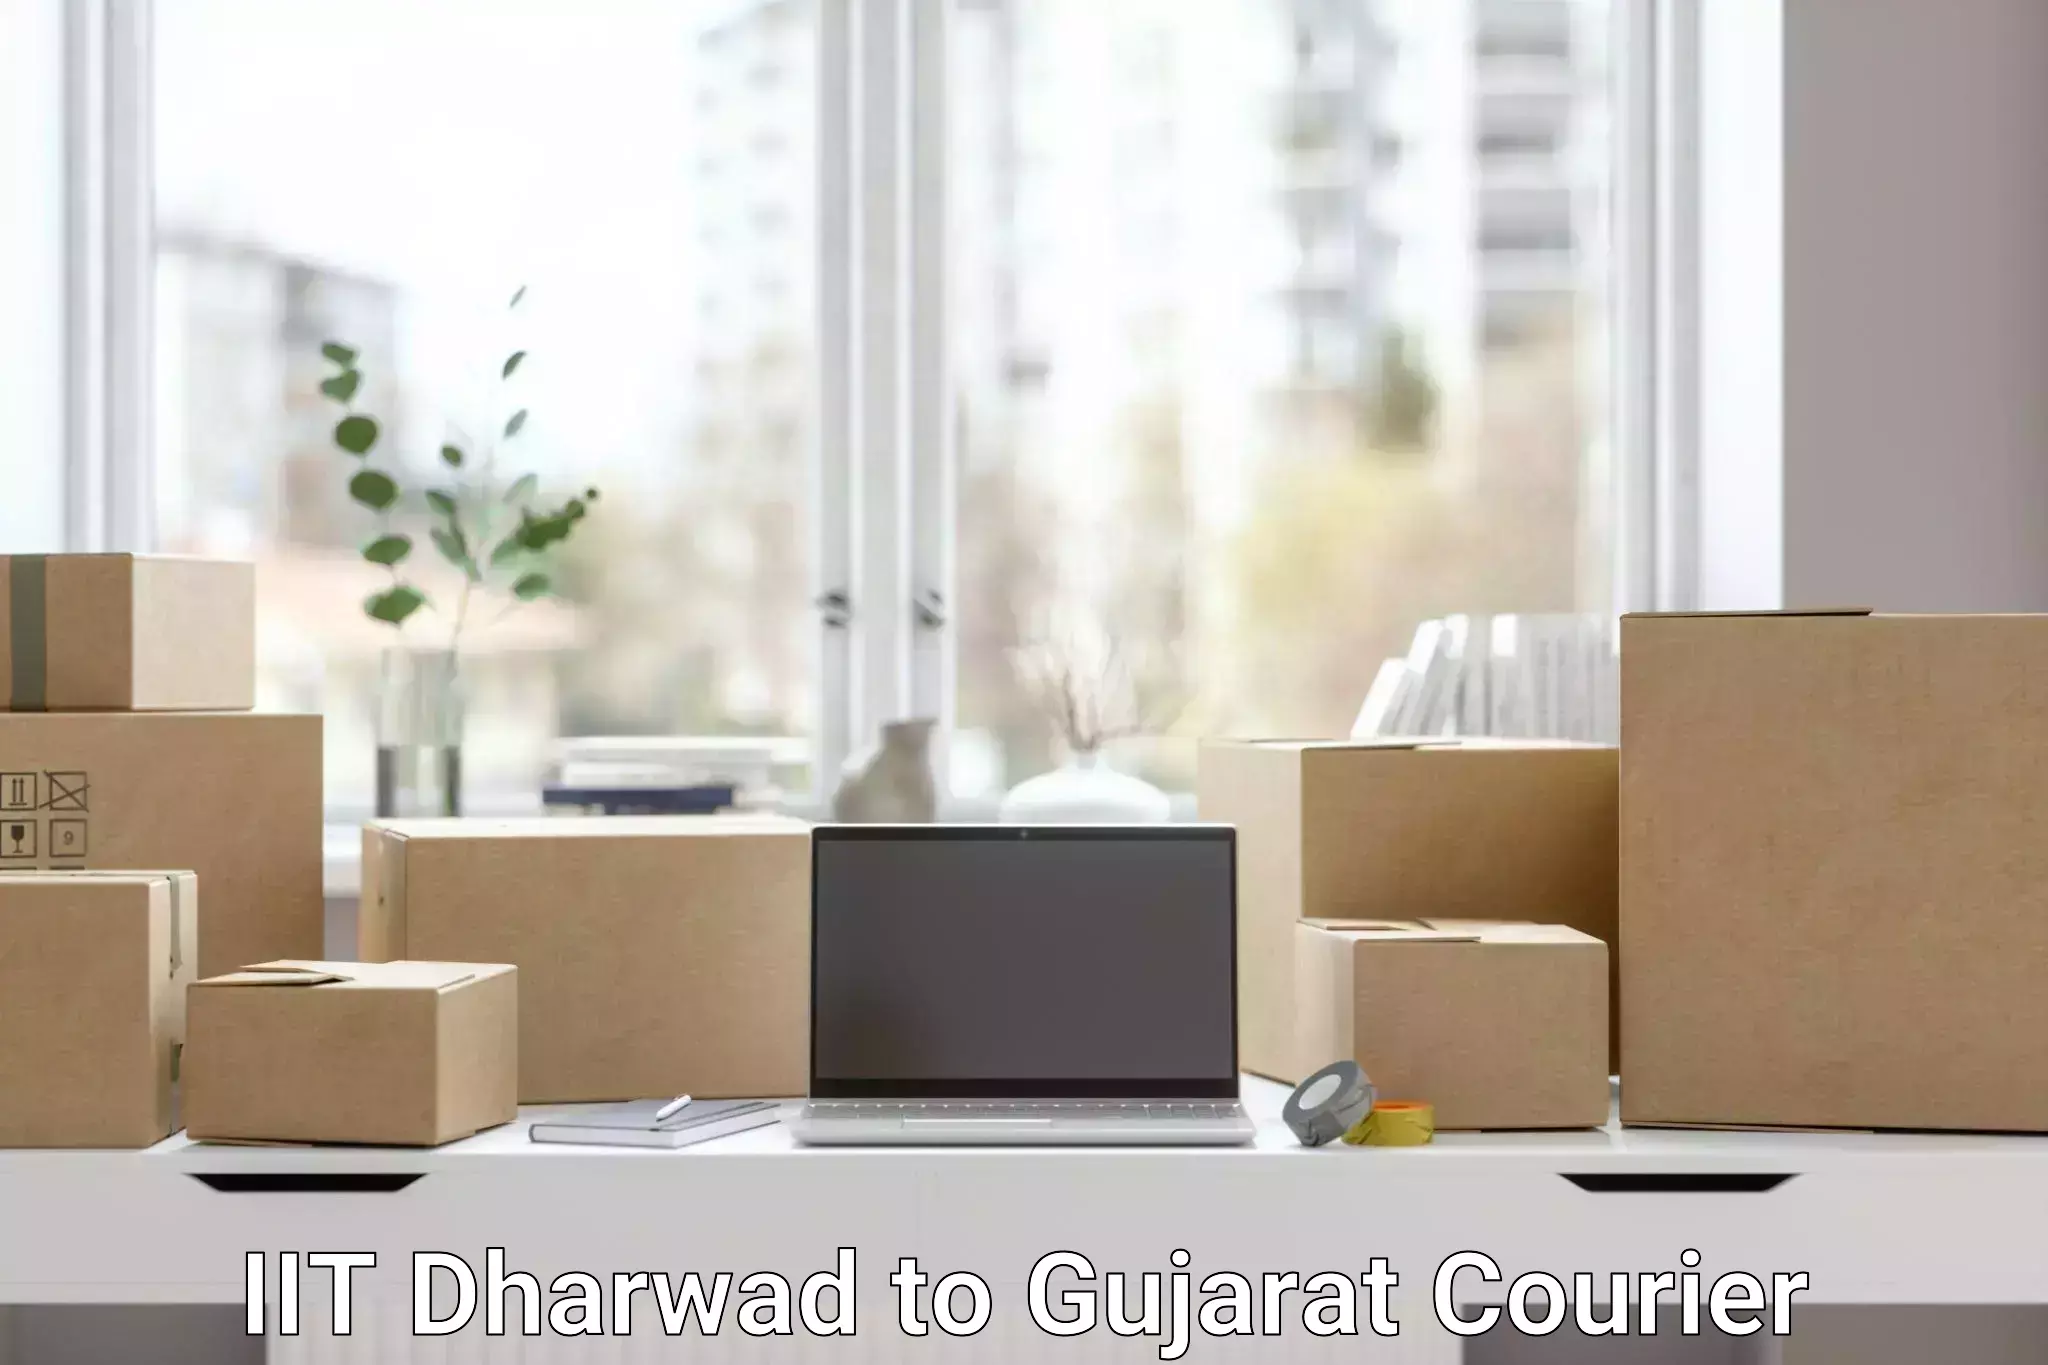 Flexible delivery scheduling IIT Dharwad to Veraval